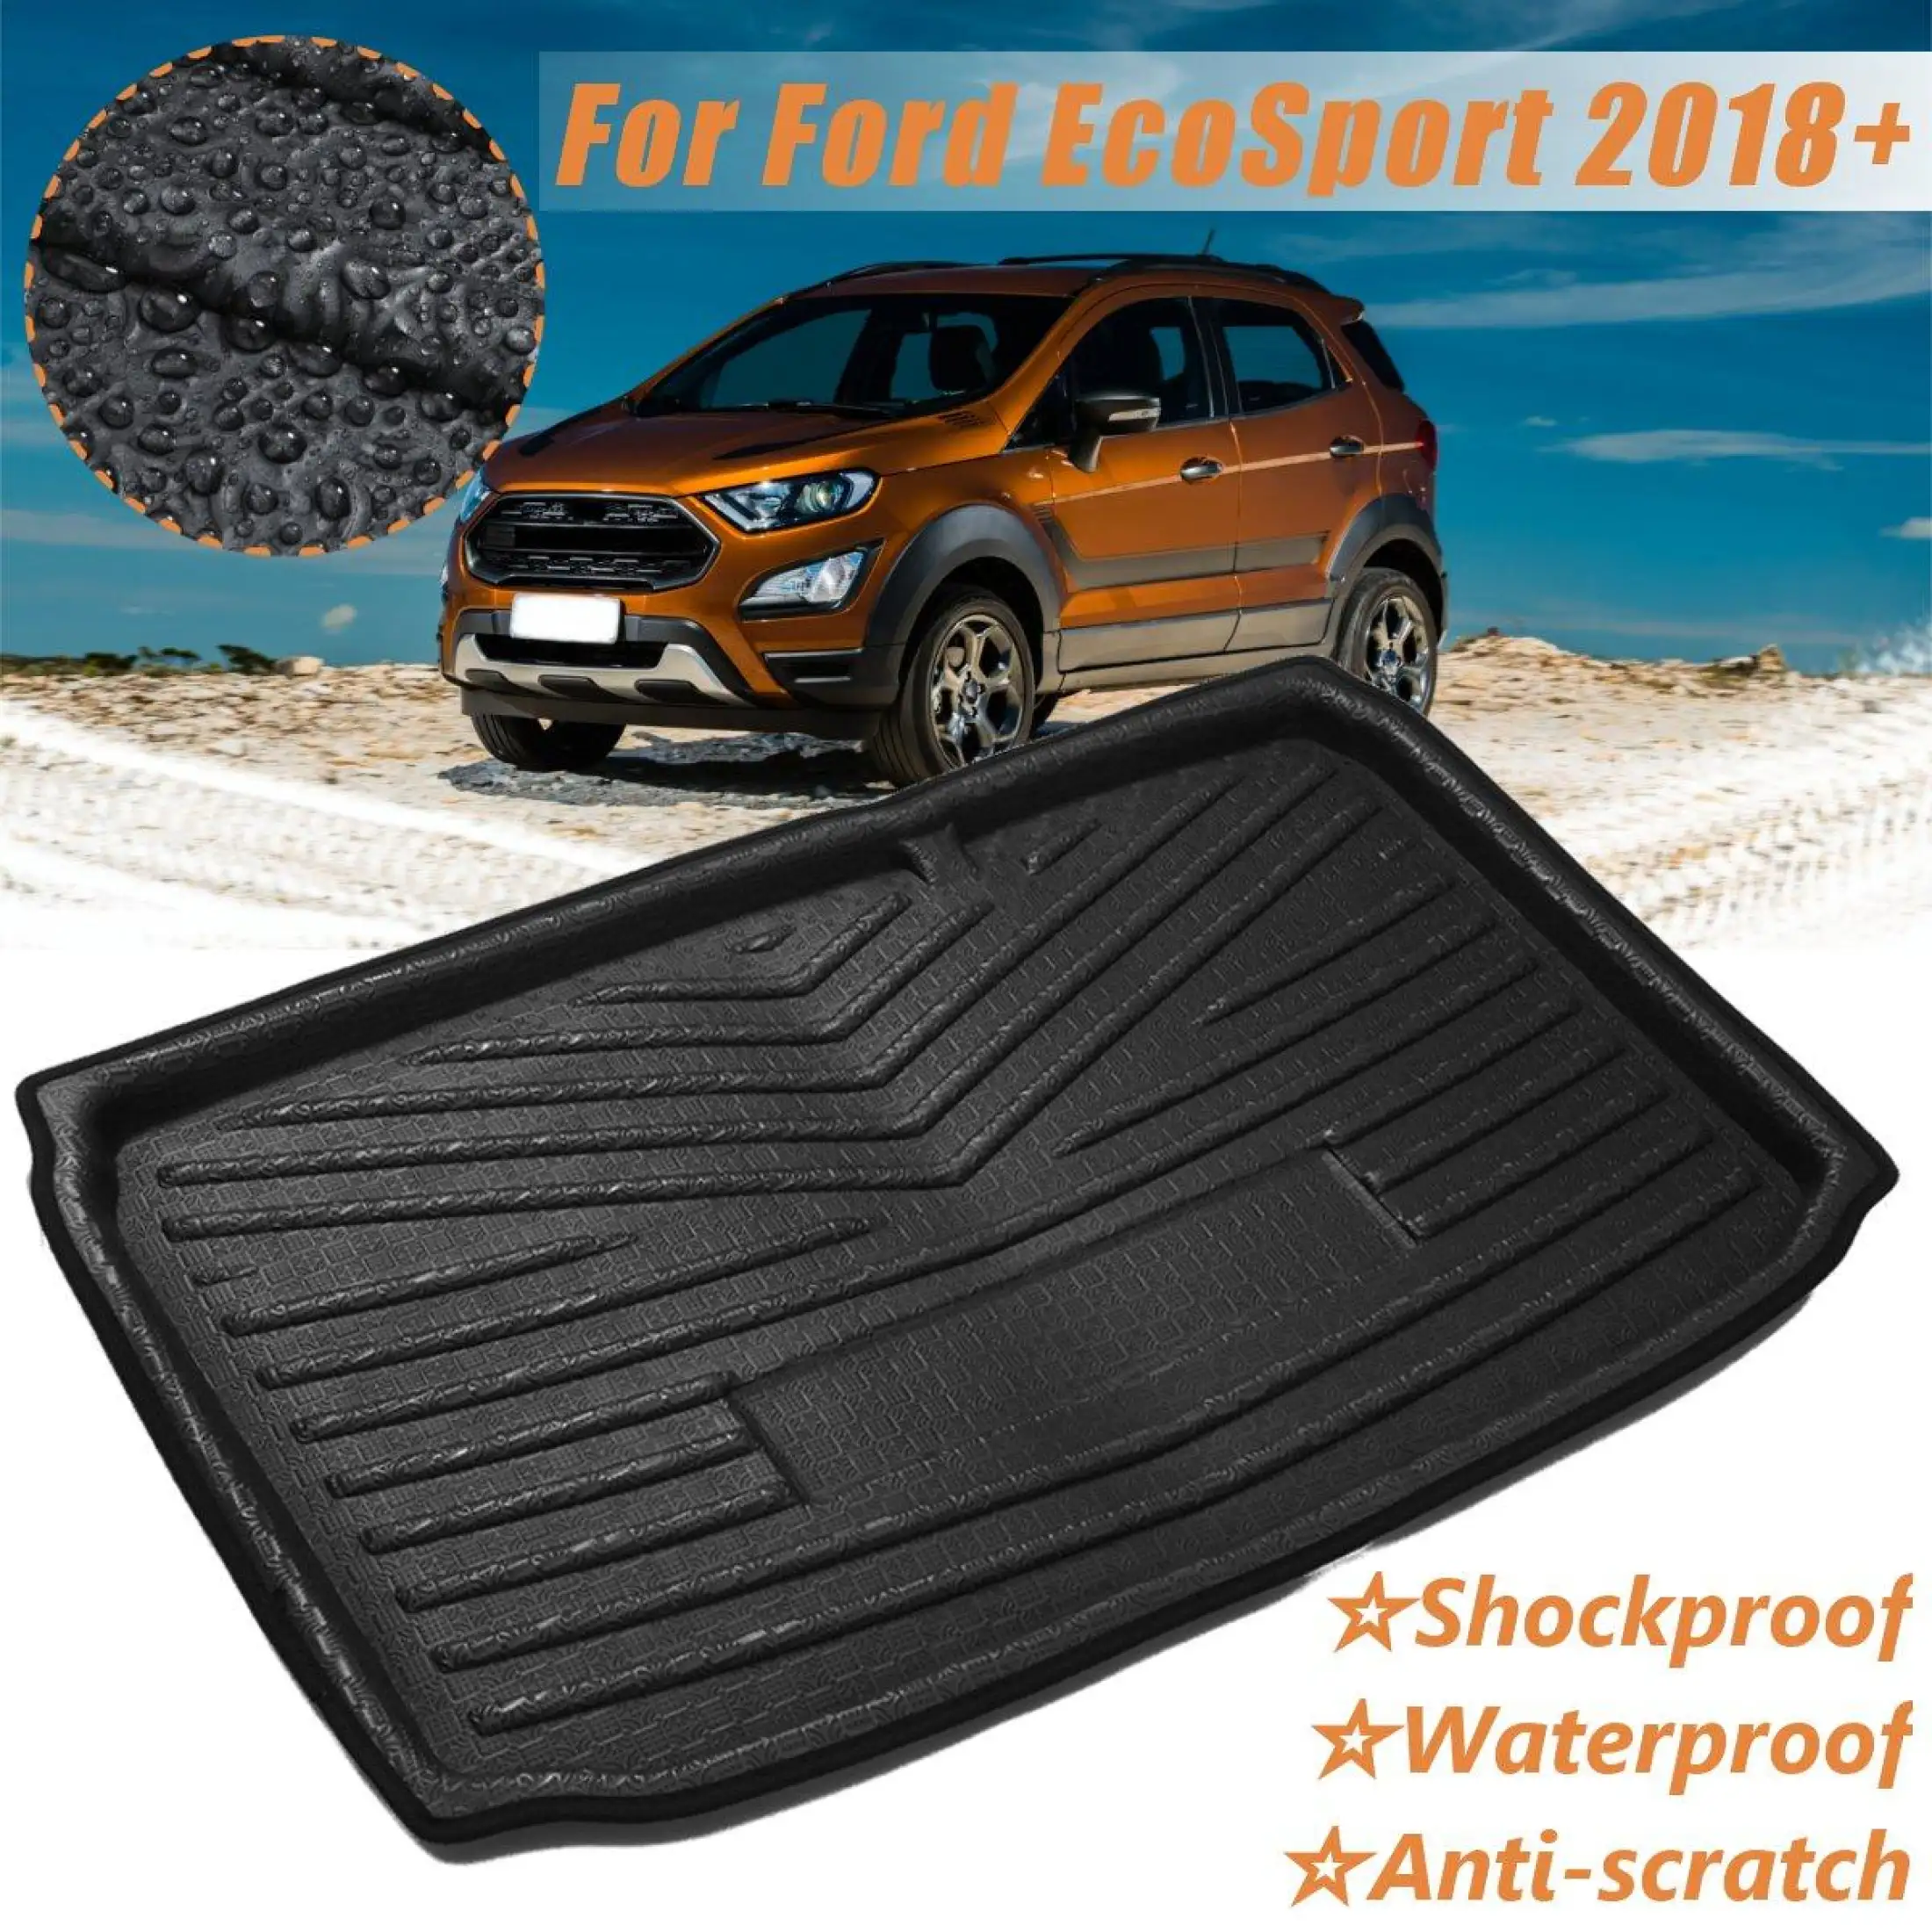 Rear Trunk Cargo Boot Liner Tray Floor Mat For Ford EcoSport 2018 Waterproof